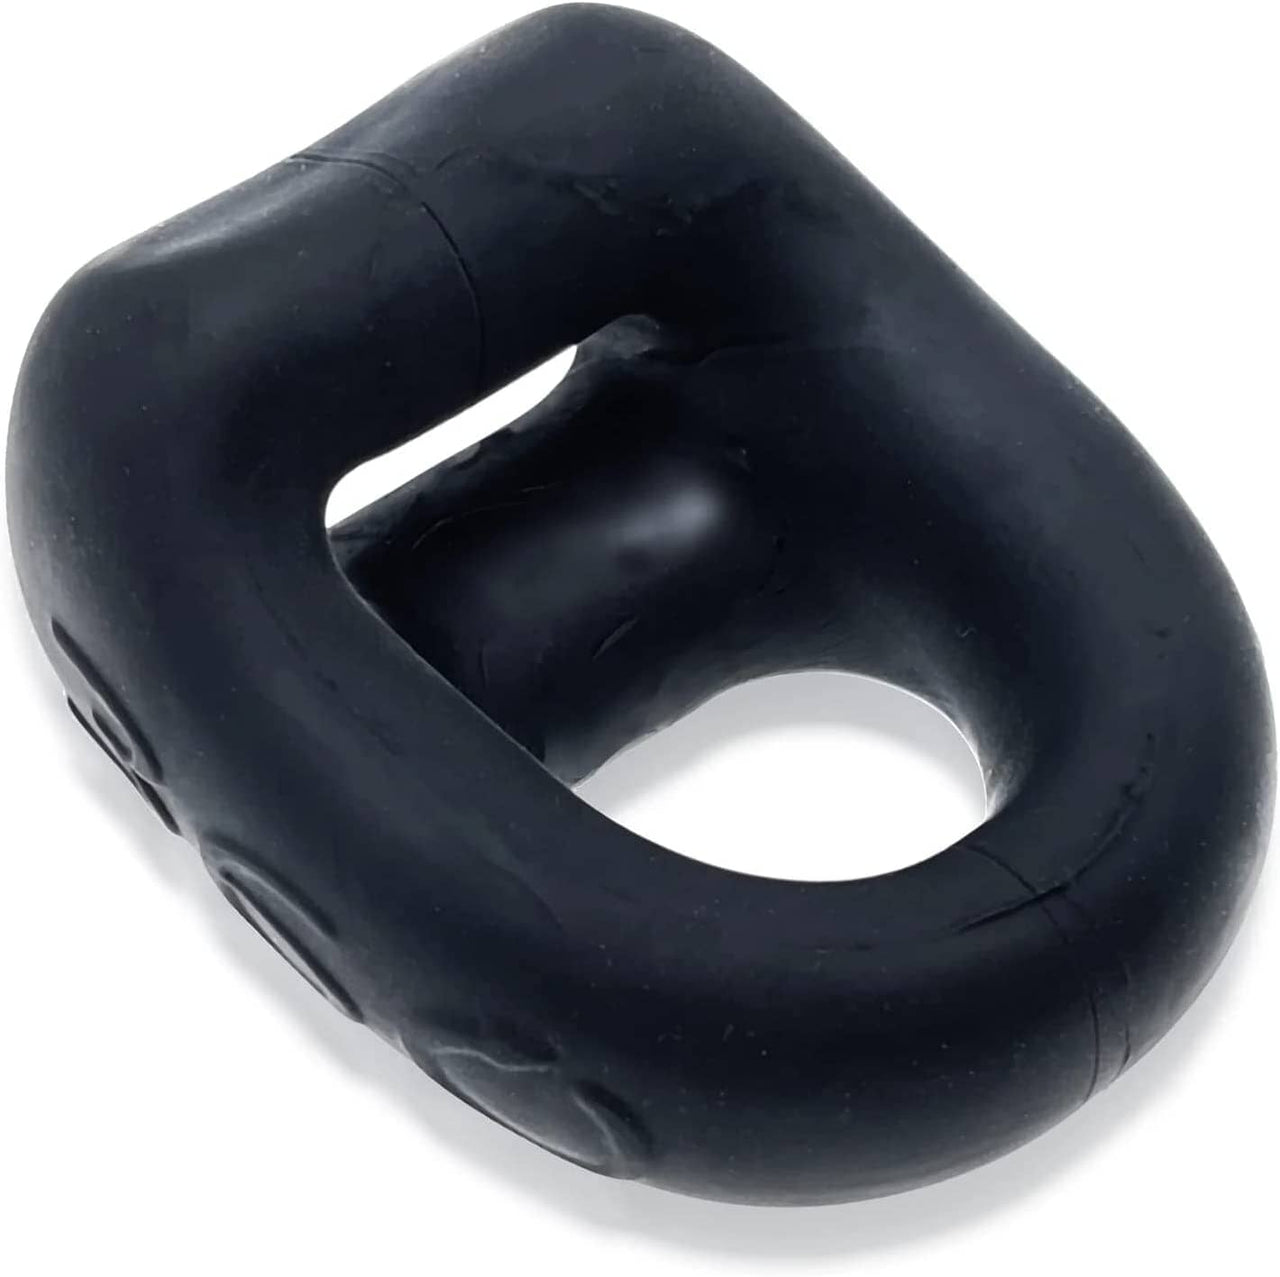 Oxballs 360 Cockring and Ballsling